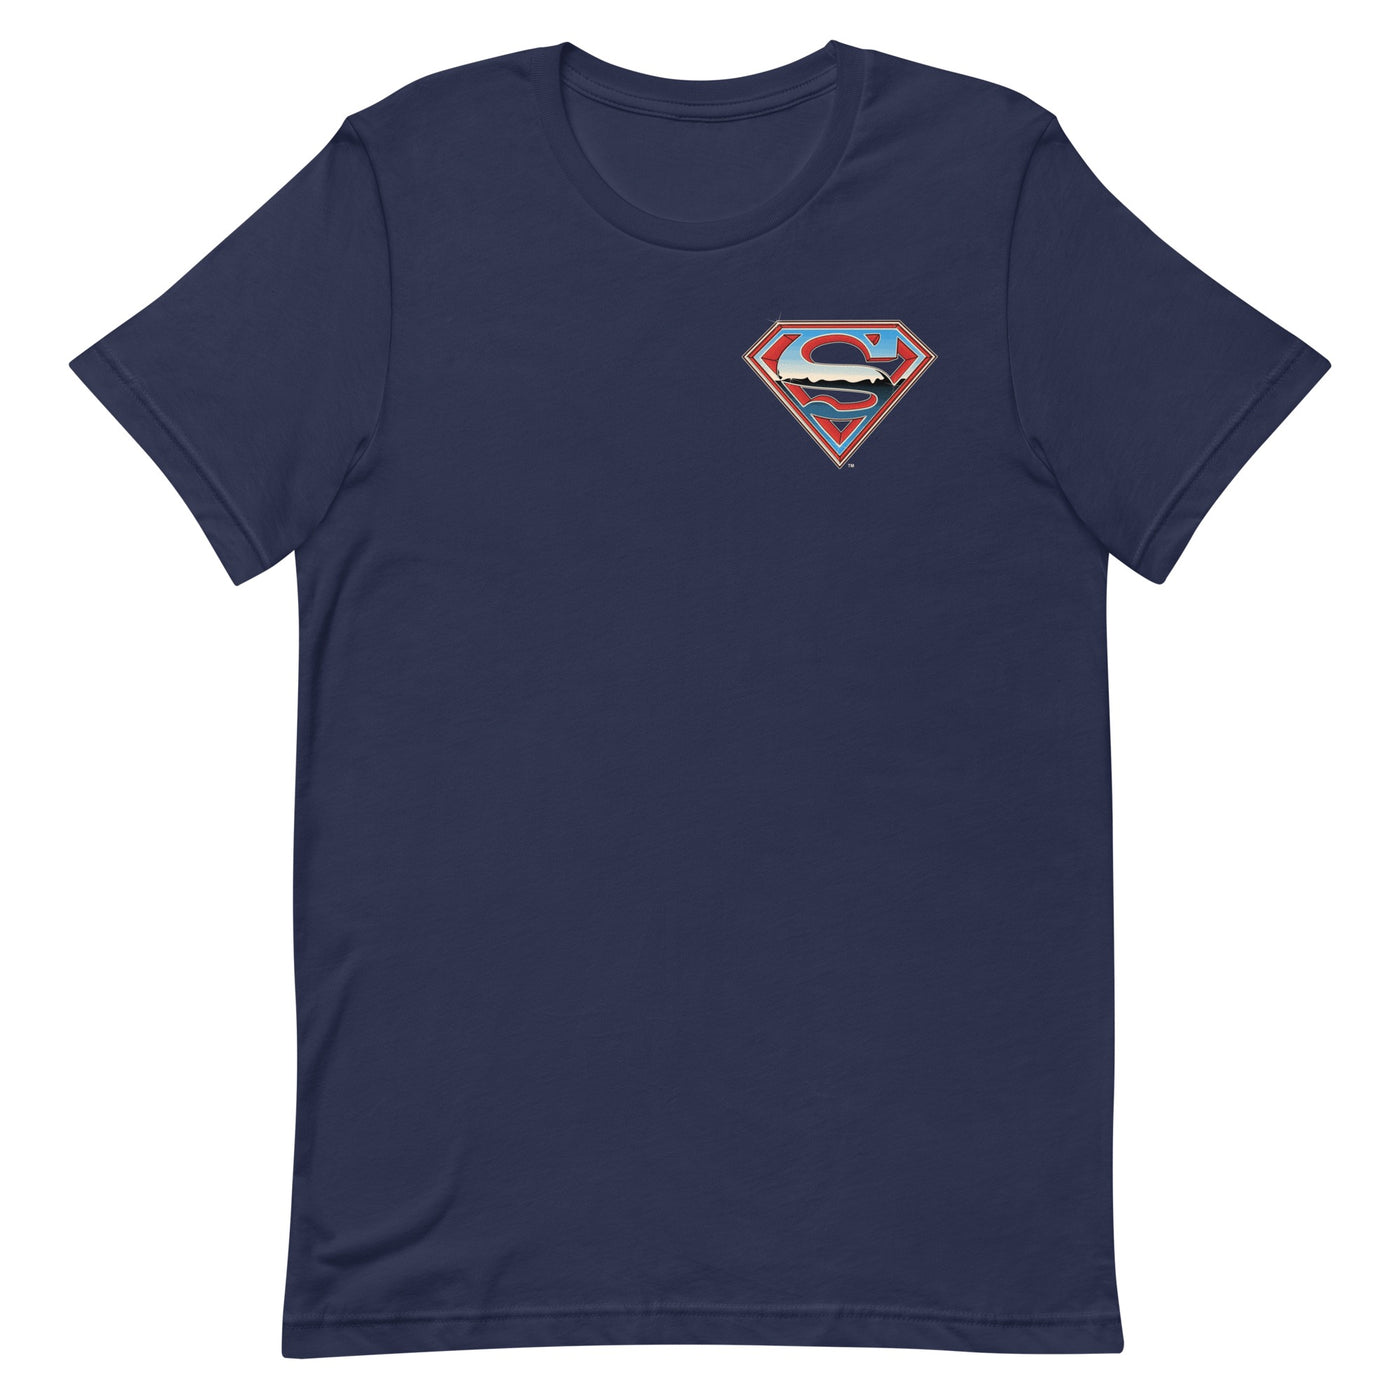 Superman The Man of Steel Adult T-Shirt